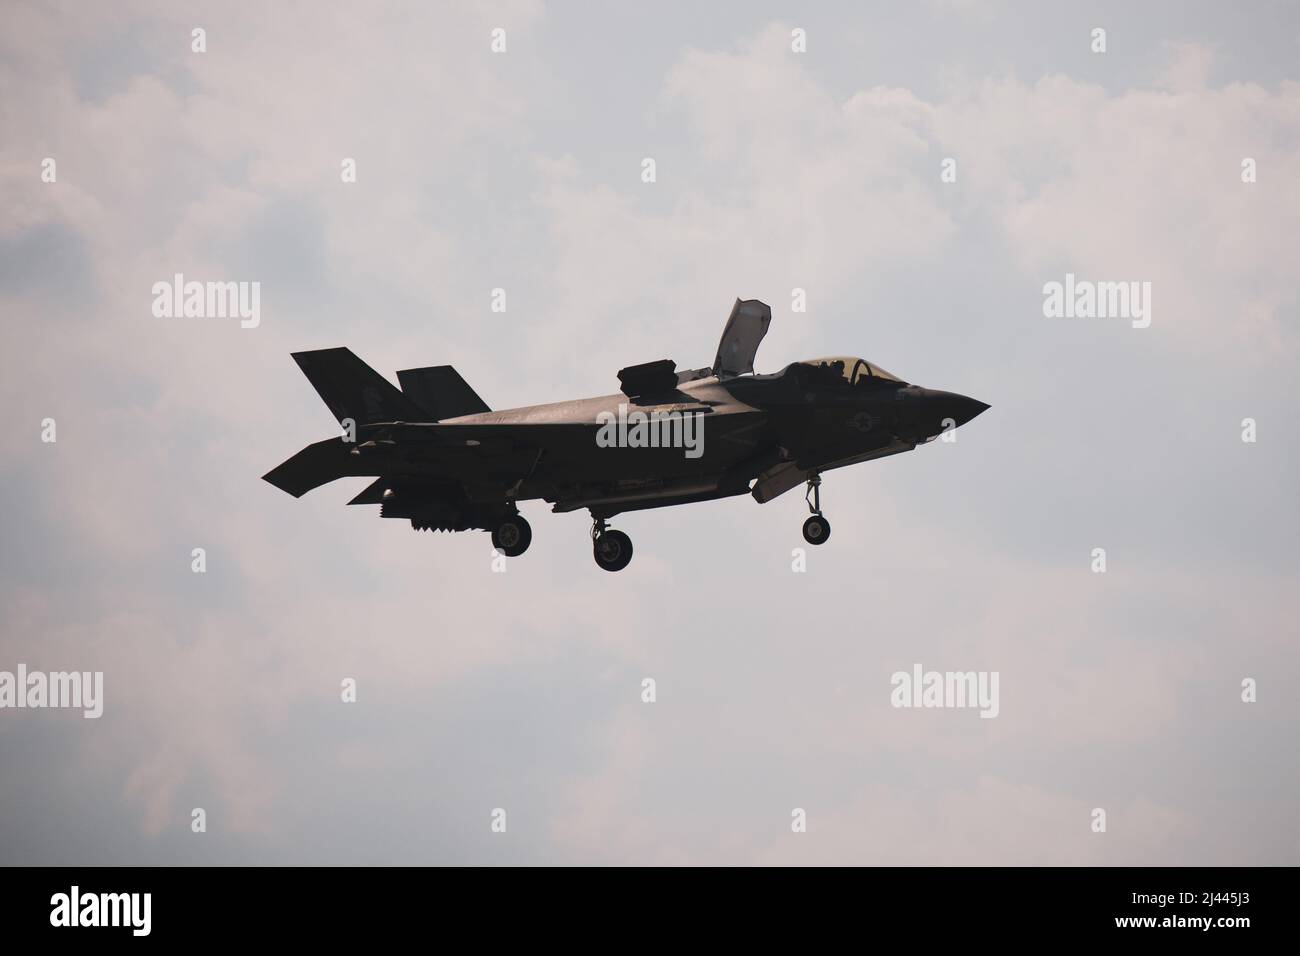 A U.S. Marine Corps F-35B Lightning II aircraft assigned to Marine Fighter Attack Squadron 121 (VMFA-121) conducts touch and go landings during field carrier landing practices (FCLP) at Ie Shima Island, Okinawa, Japan, April 7, 2022. The FCLP trains the F-35B pilots for proficiency and mission readiness when deployed aboard aircraft carriers. (U.S. Marine Corps photo by Lance Cpl. Kyle Chan) Stock Photo